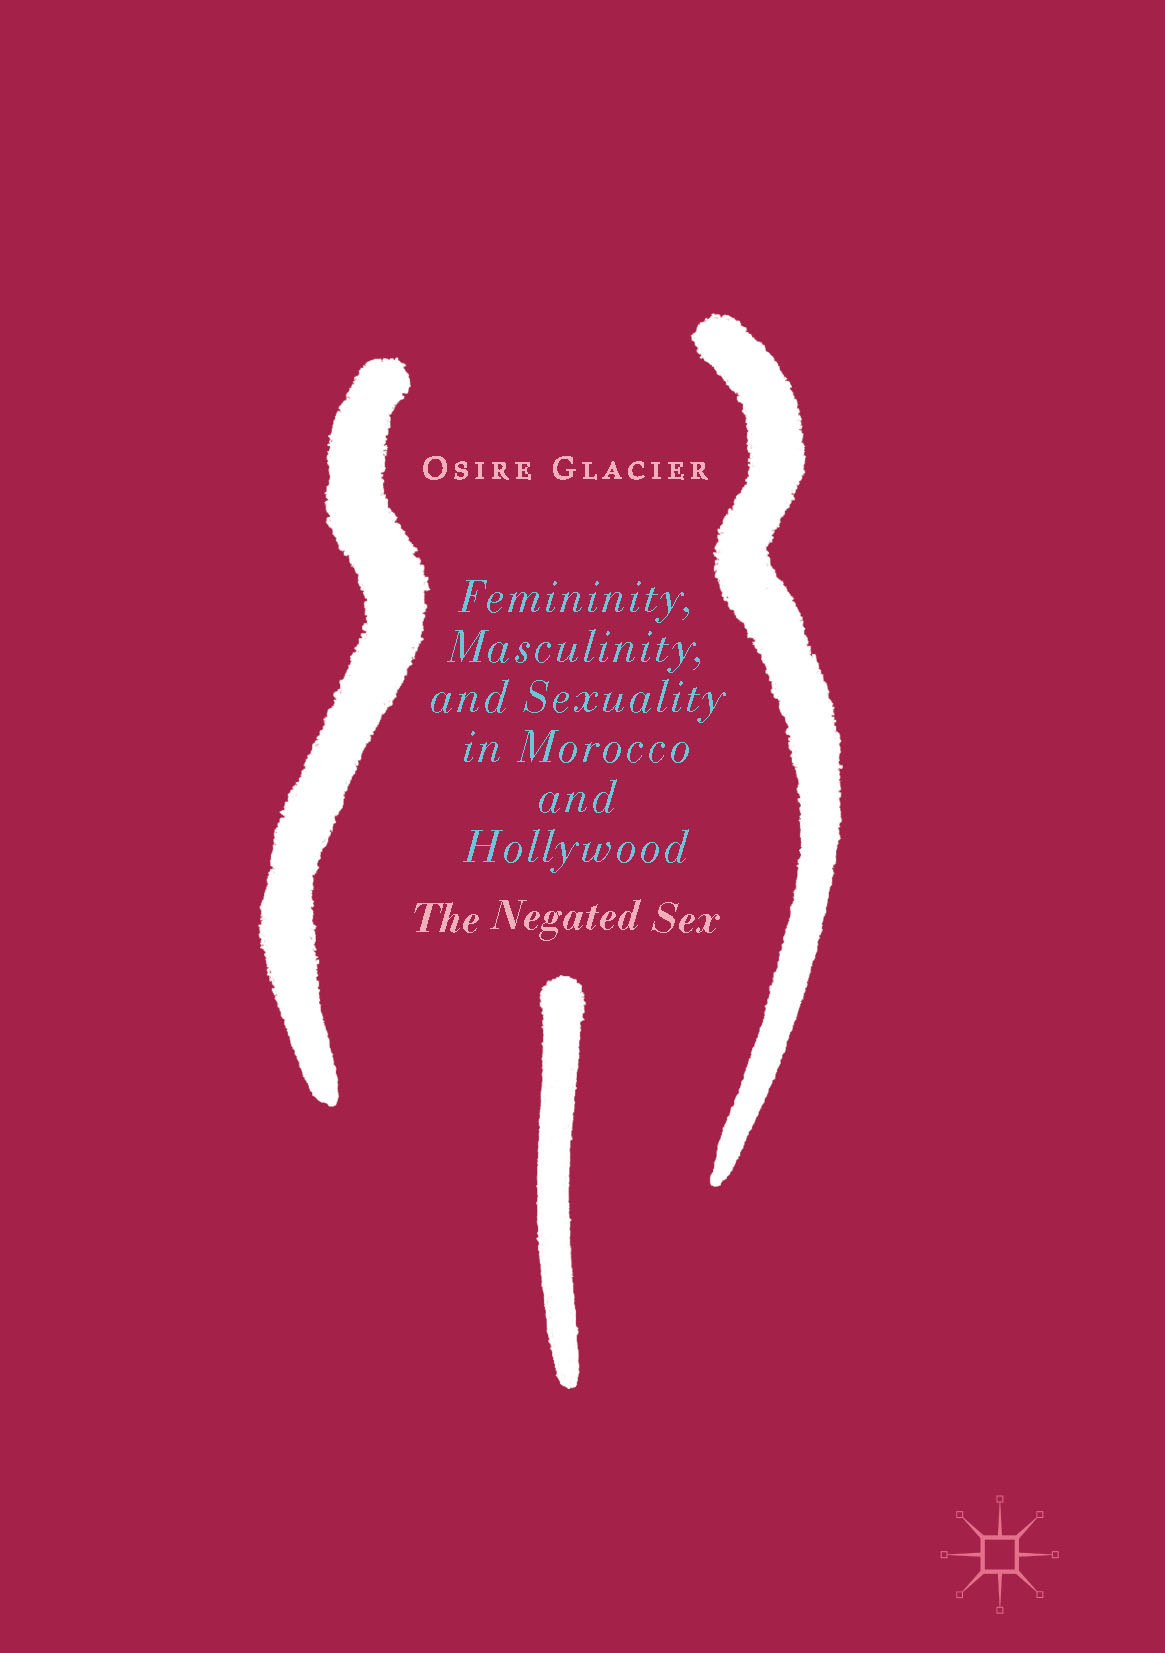 Glacier, Osire - Femininity, Masculinity, and Sexuality in Morocco and Hollywood, ebook